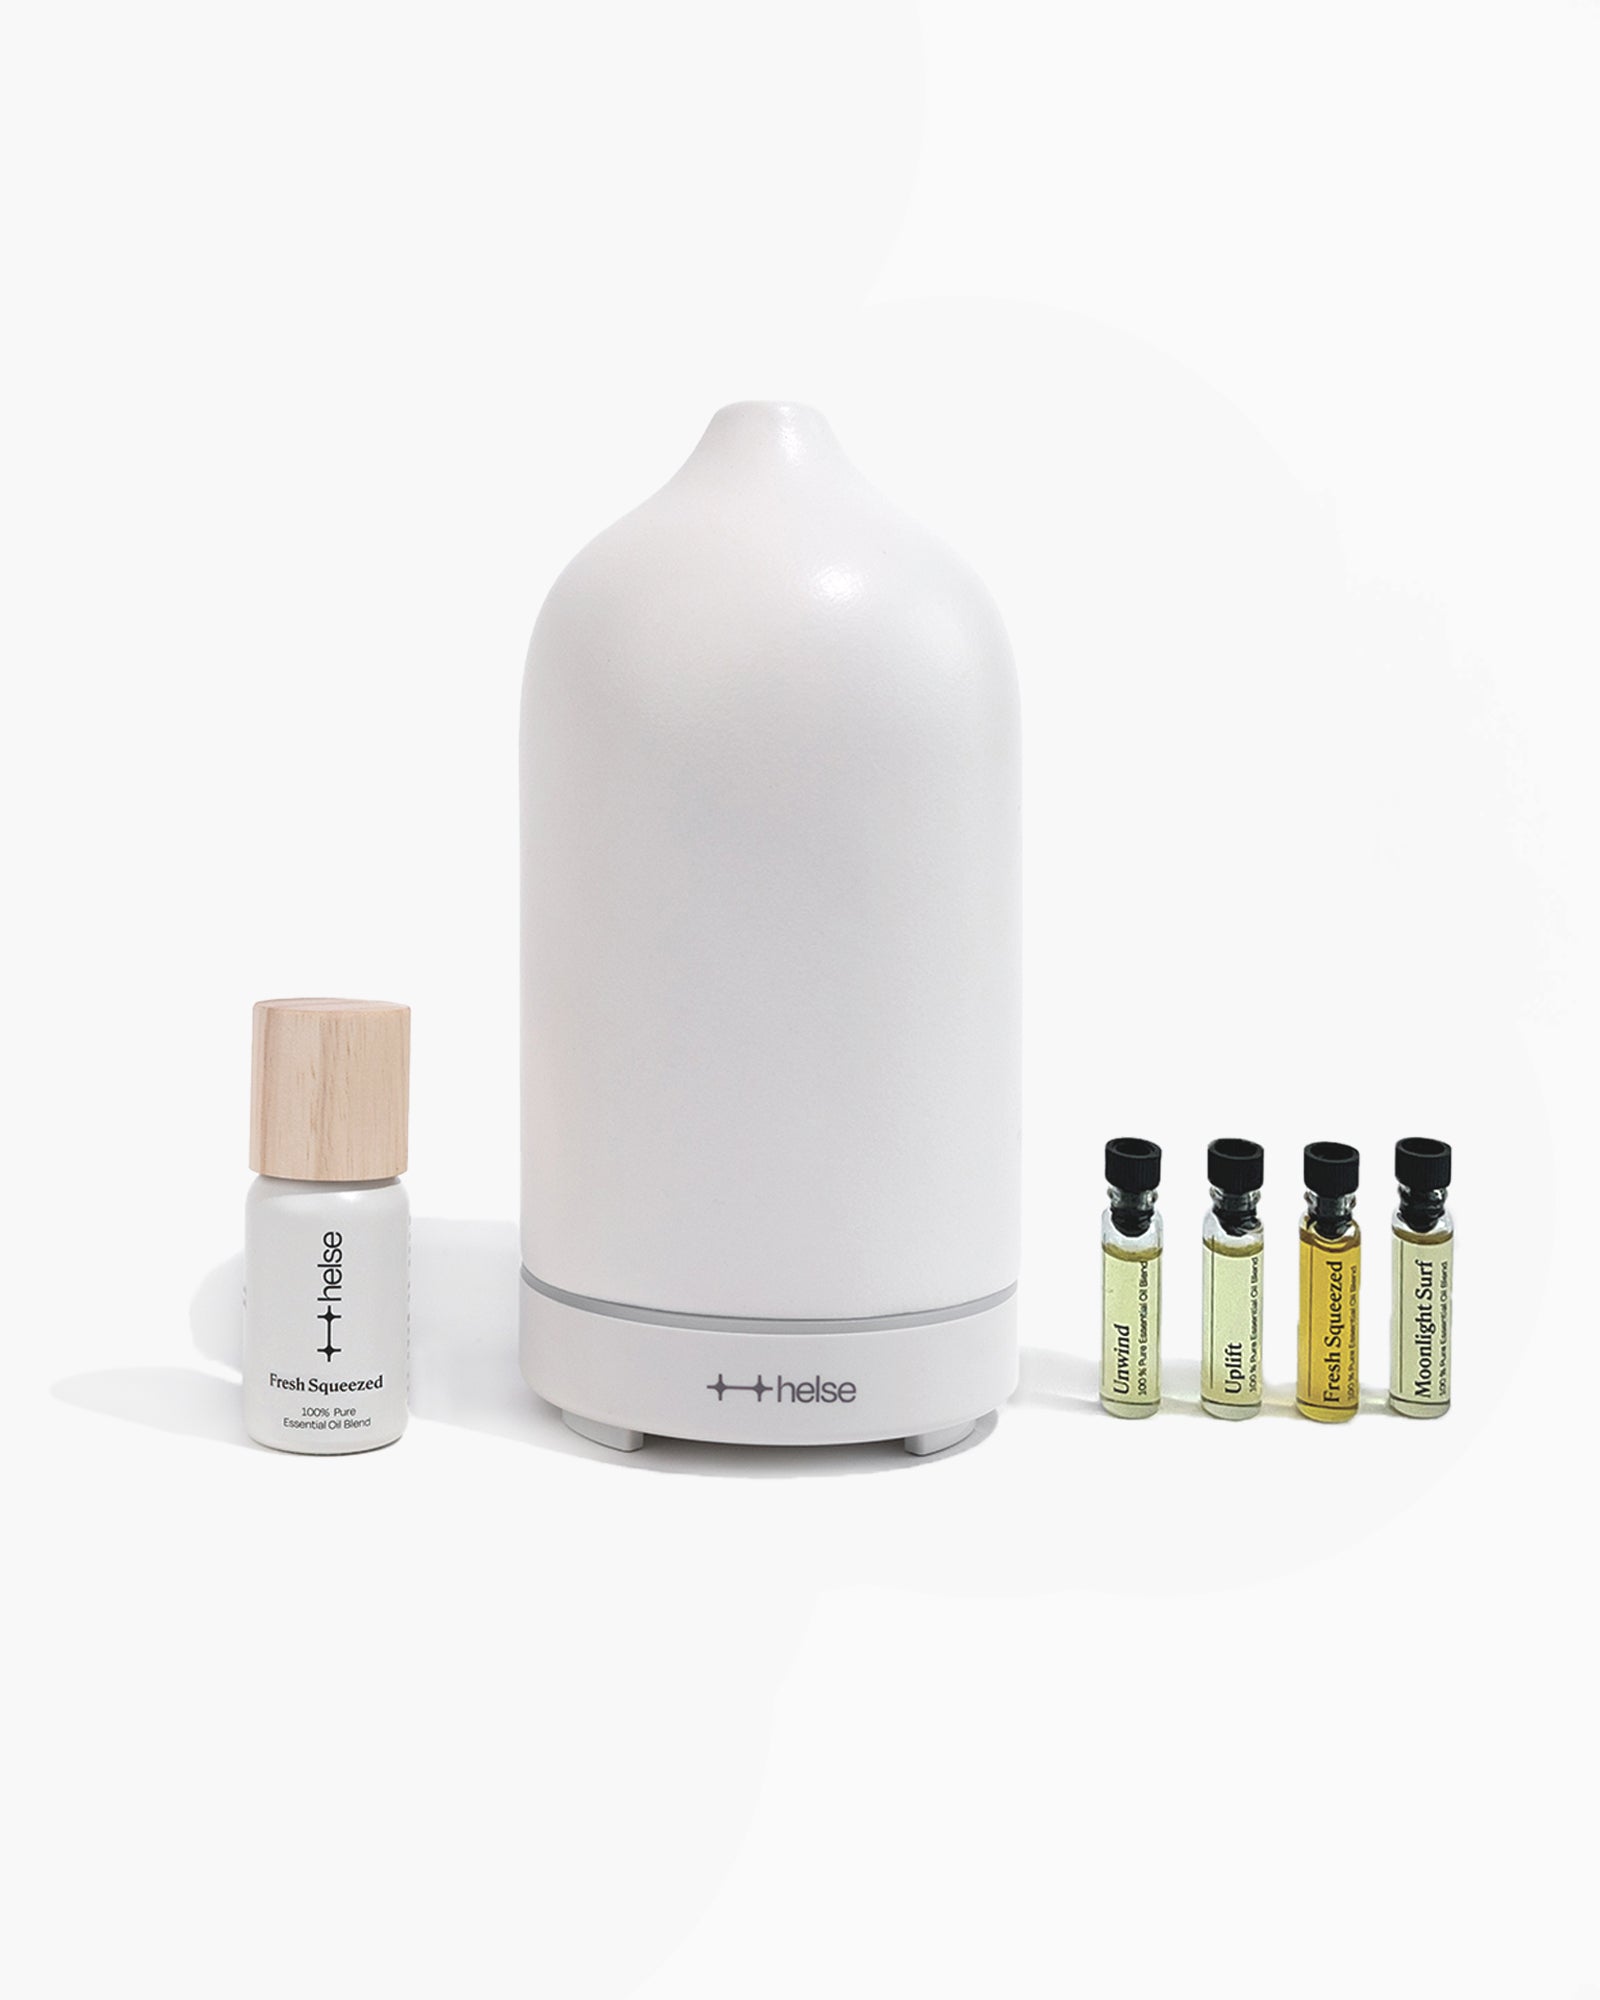 Woodsy Diffuser + Set of 6 Essential Oils Singles – Buy Natural